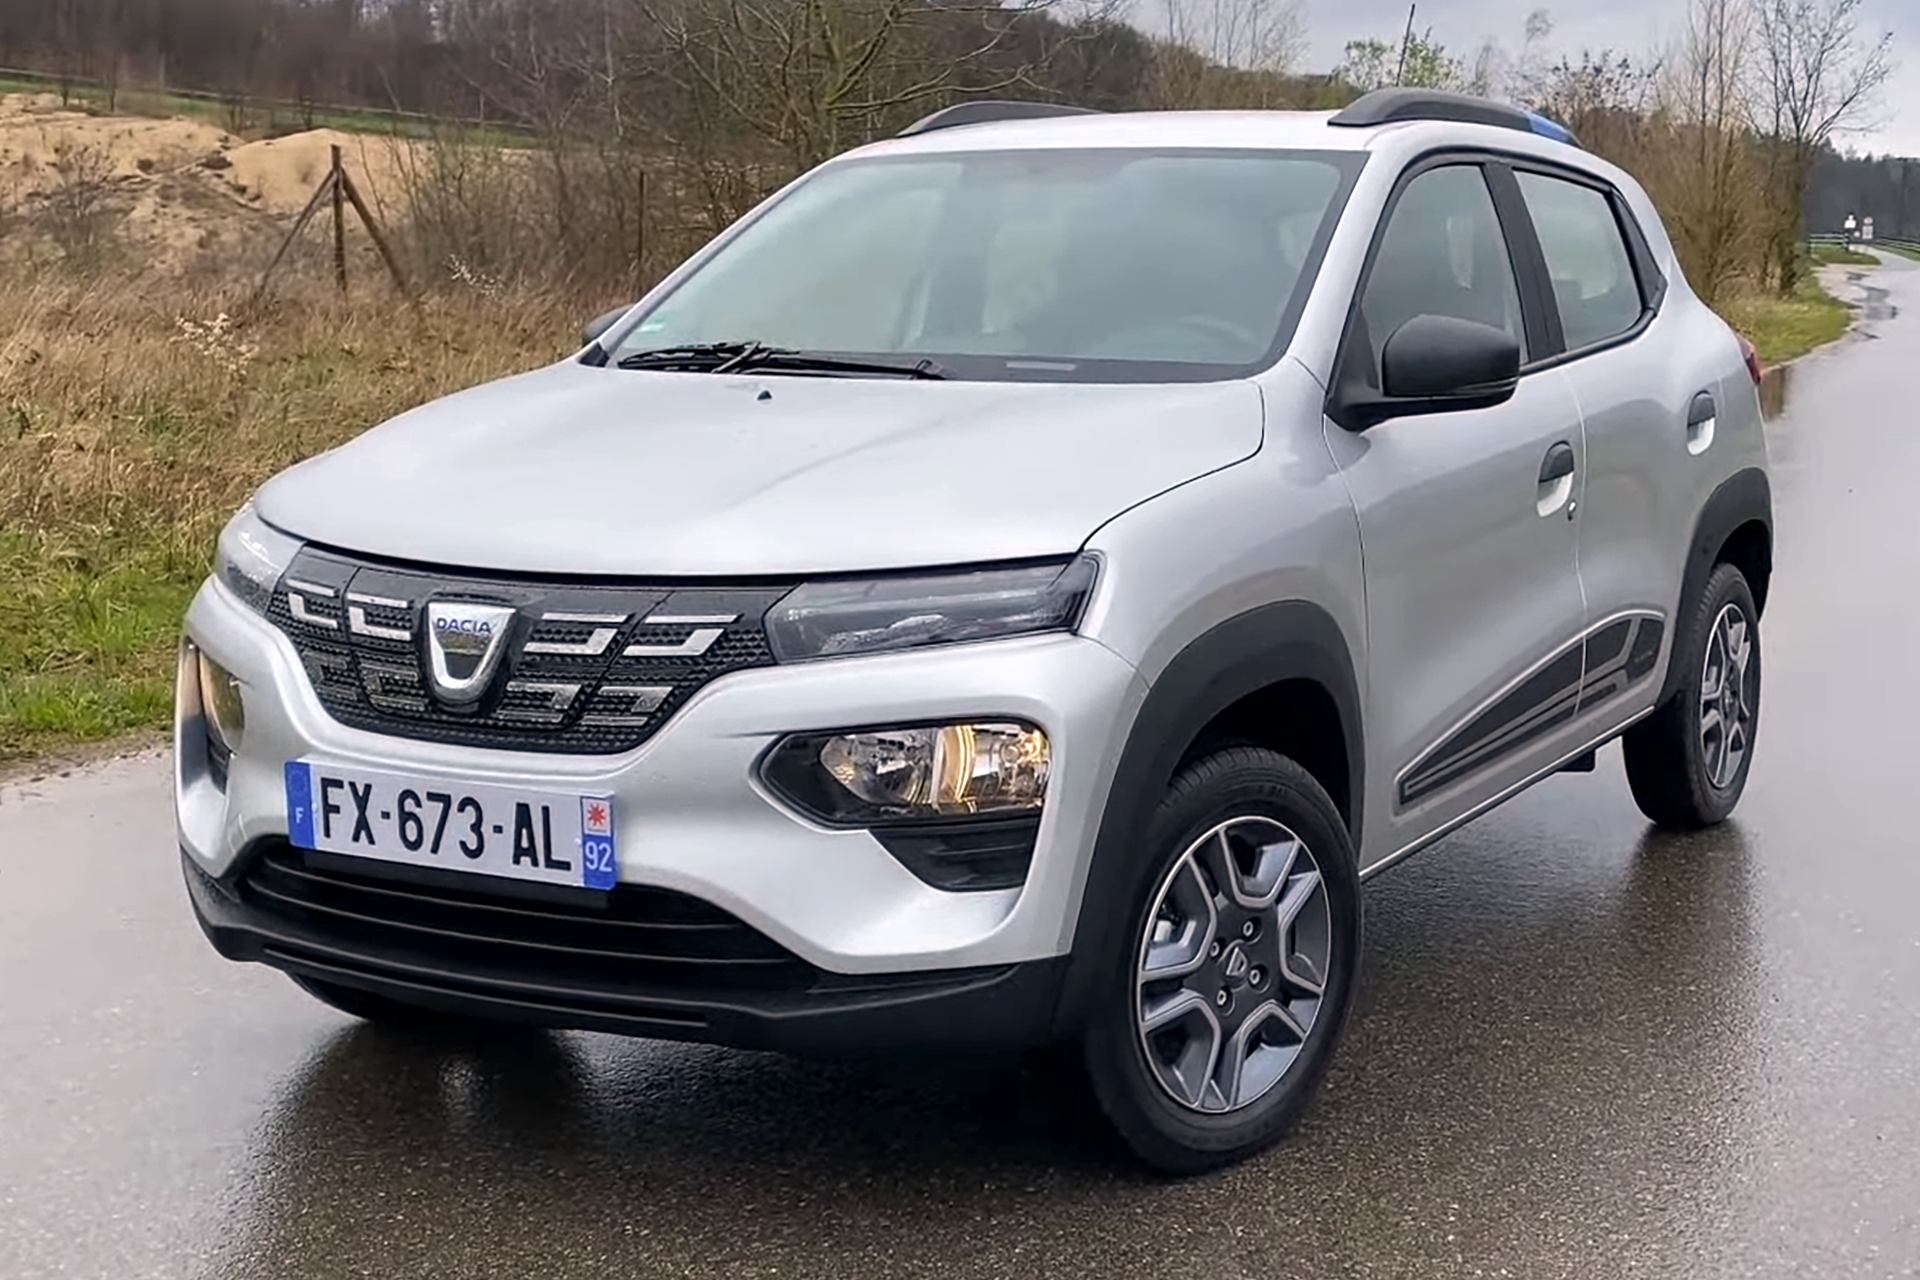 https://upload.wikimedia.org/wikipedia/commons/e/e2/2021_Dacia_Spring_Electric_%28France%29_front_view_02.png